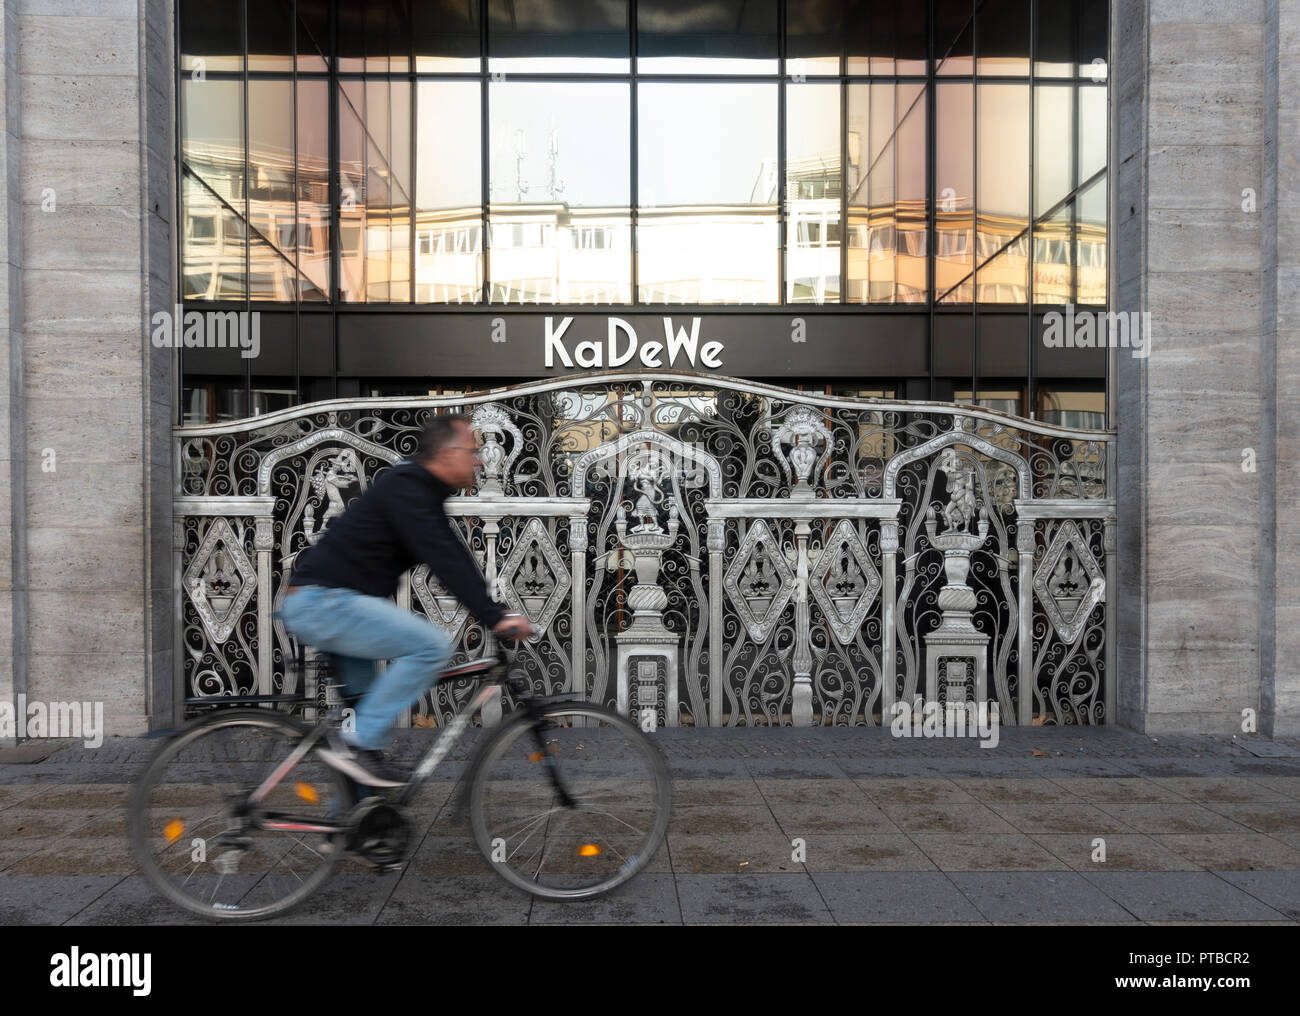 Exterior of  KaDeWe department store with ornate gates closed on public holiday, Berlin, Germany Stock Photo